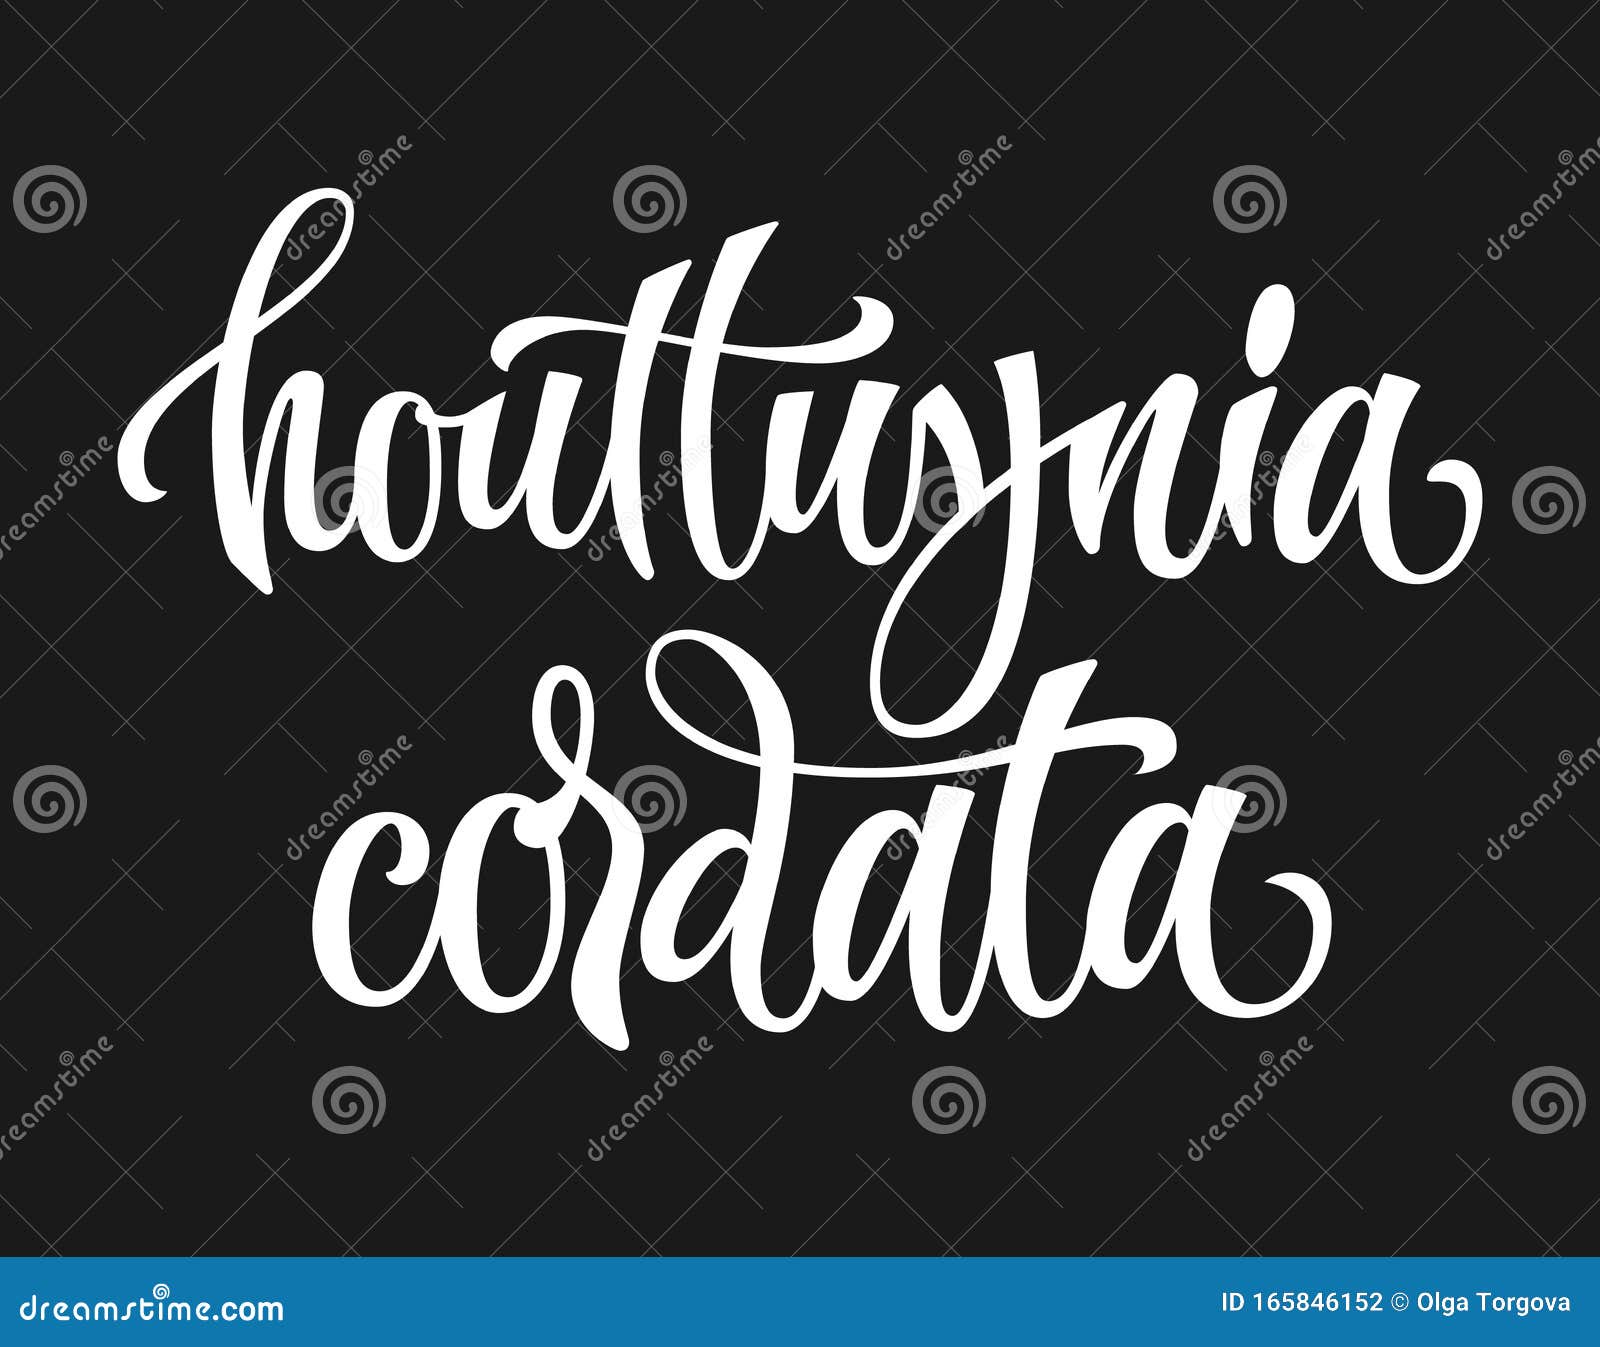  hand drawn calligraphy style lettering word - houttuynia cordata